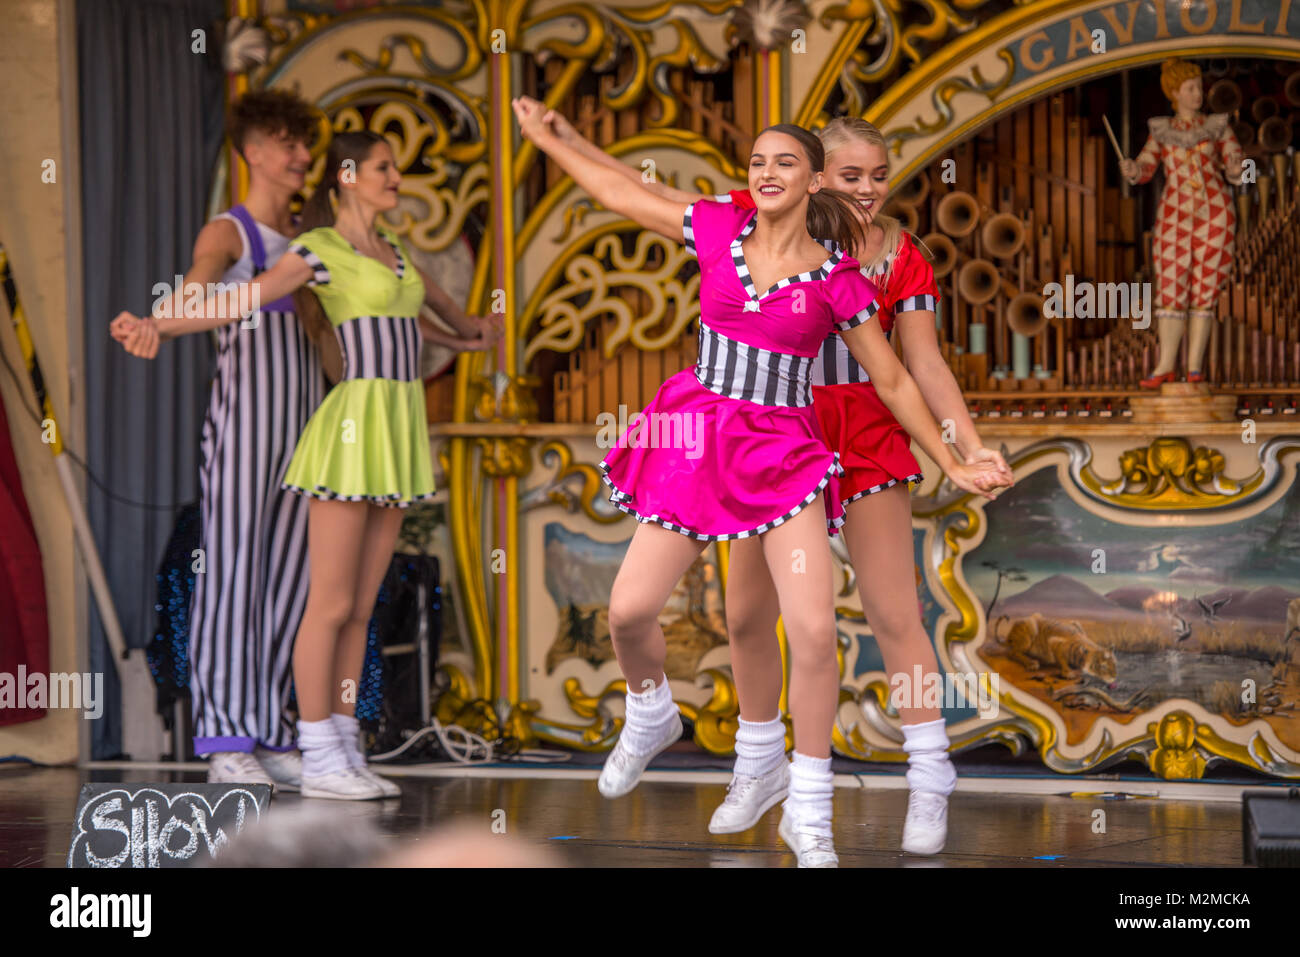 Dancers in colorful costumes dance with joy on top of fairground organ, Masham, North Yorkshire, UK Stock Photo